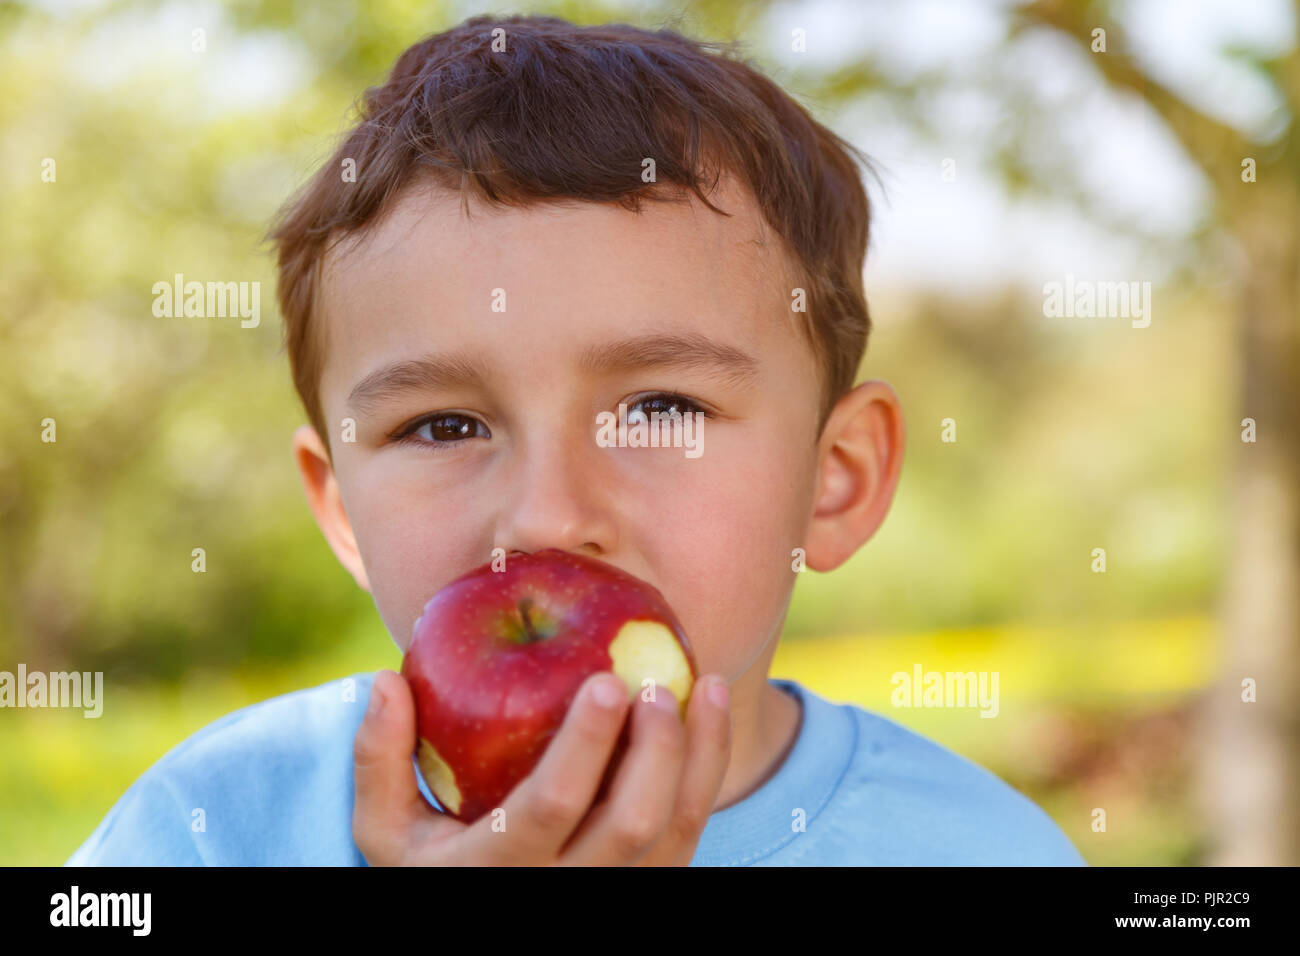 Child kid little boy eating apple fruit outdoor outdoors outside spring nature Stock Photo